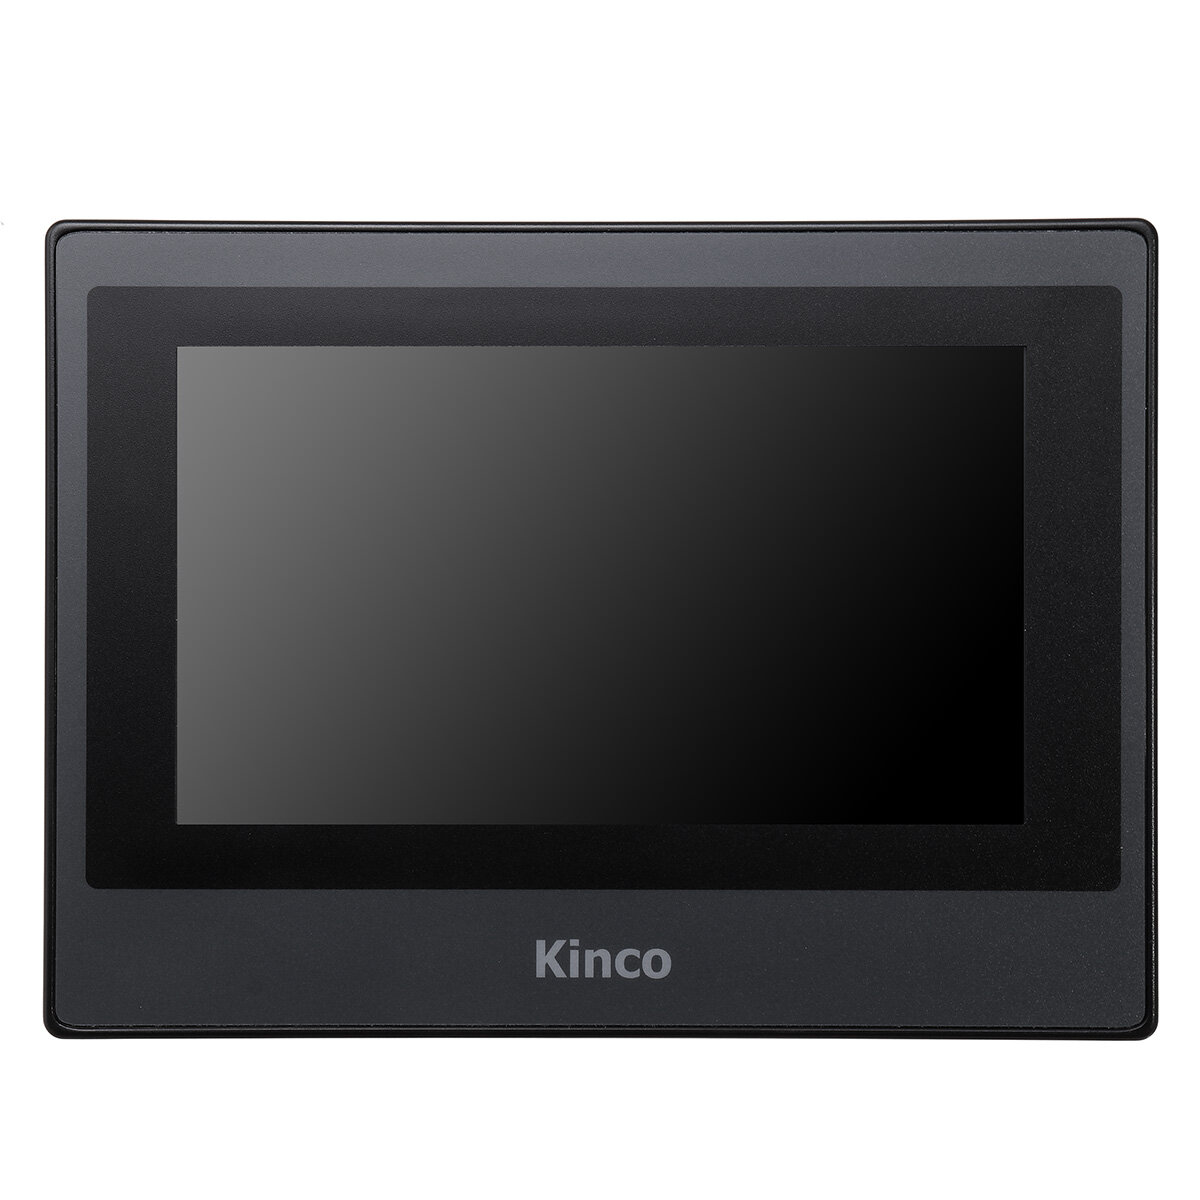 Image of Kinco MT4434t MT4434te HMI Touch Screen 7 inch 800 * 480 Ethernet 1 USB Host New Human Interface